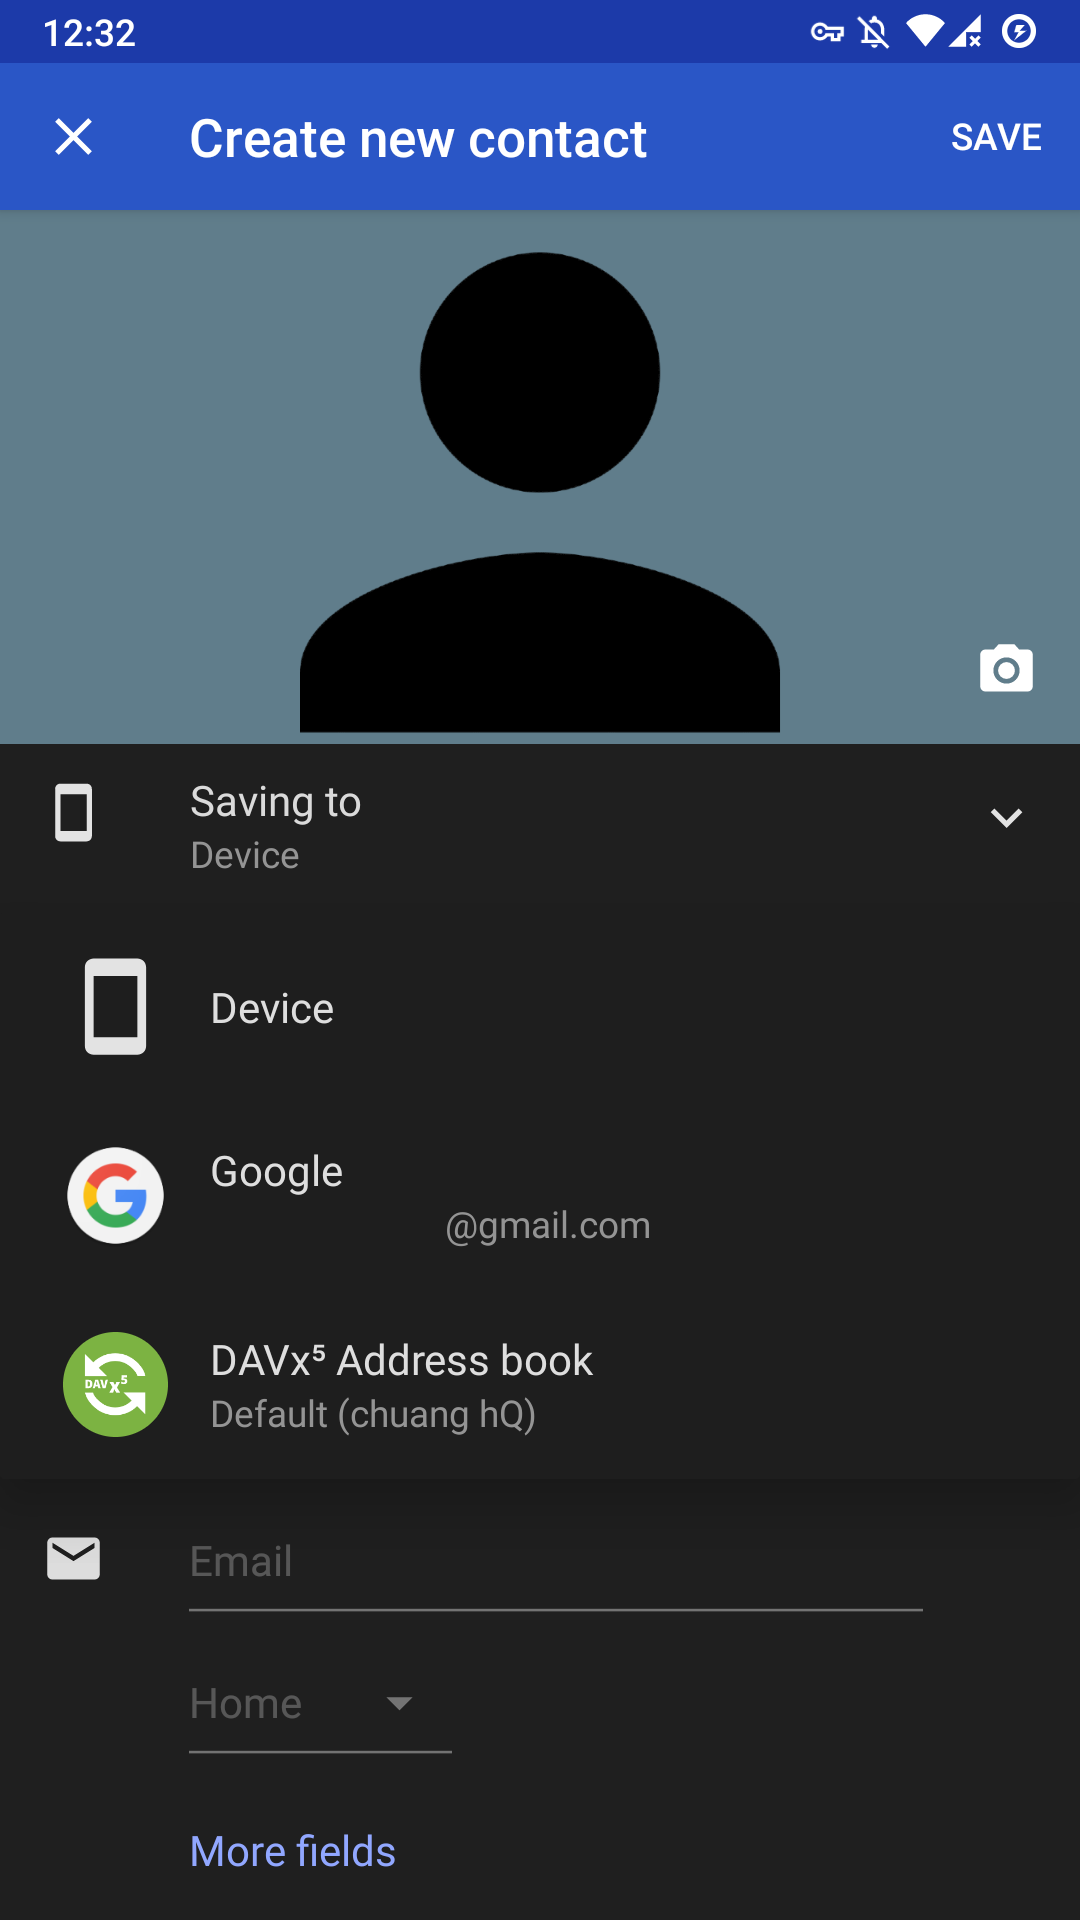 Android Contacts